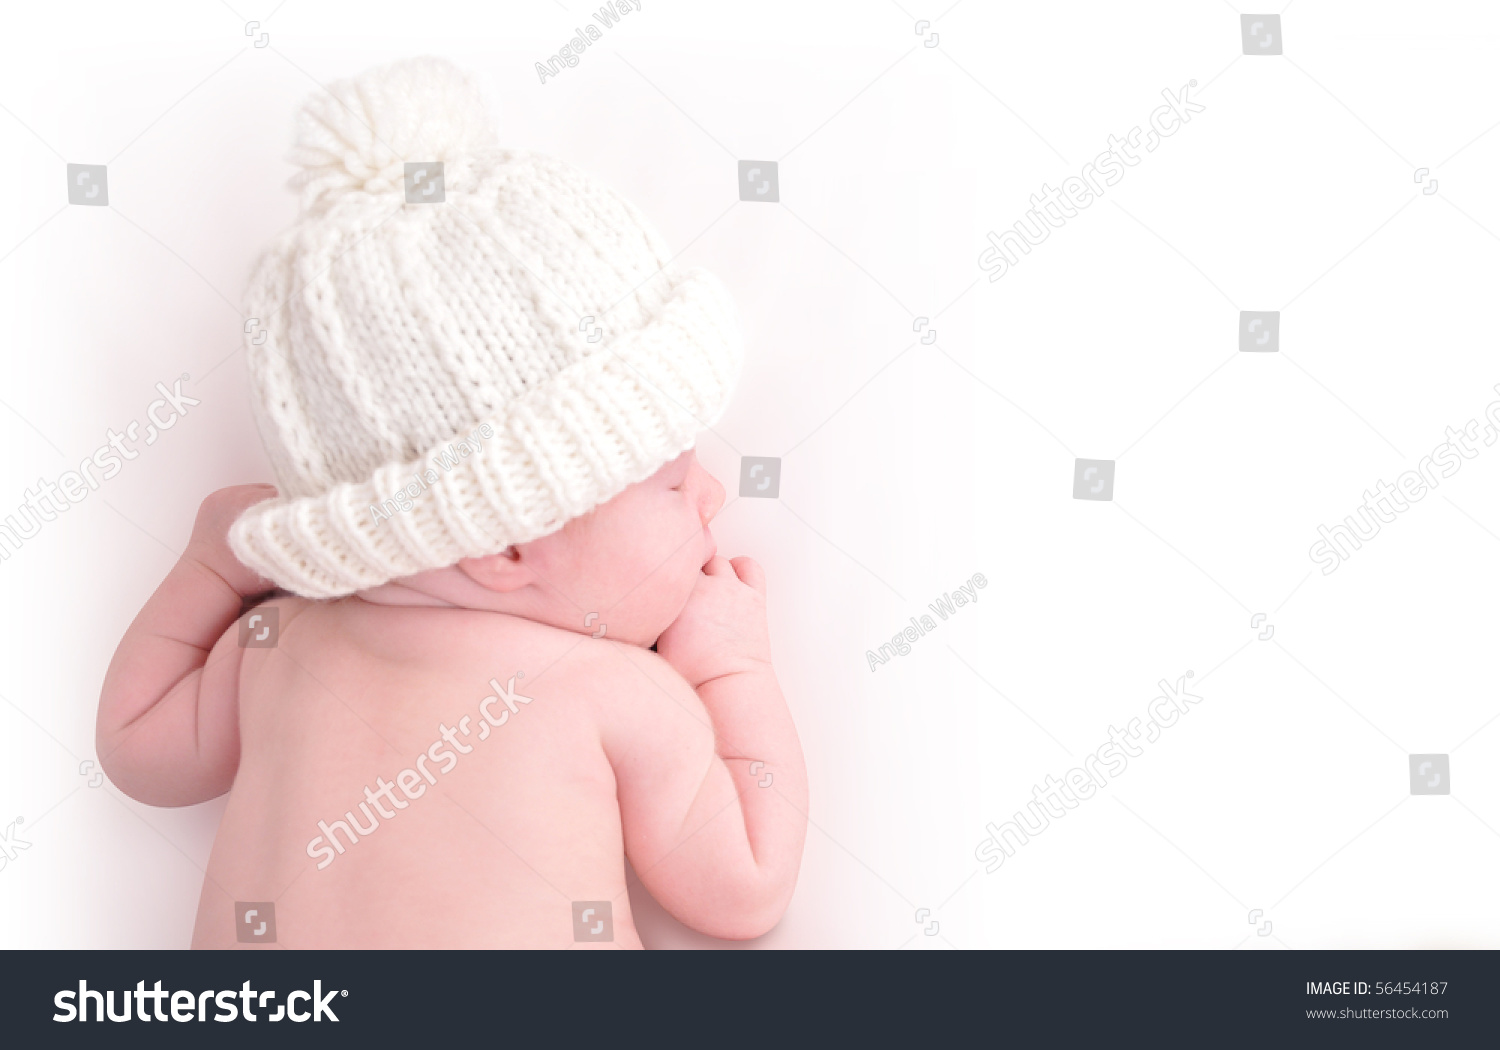 A newborn baby is wearing a white hat and laying down sleeping on a white isolated background. Use the photo to represent life, parenting or childhood. #56454187